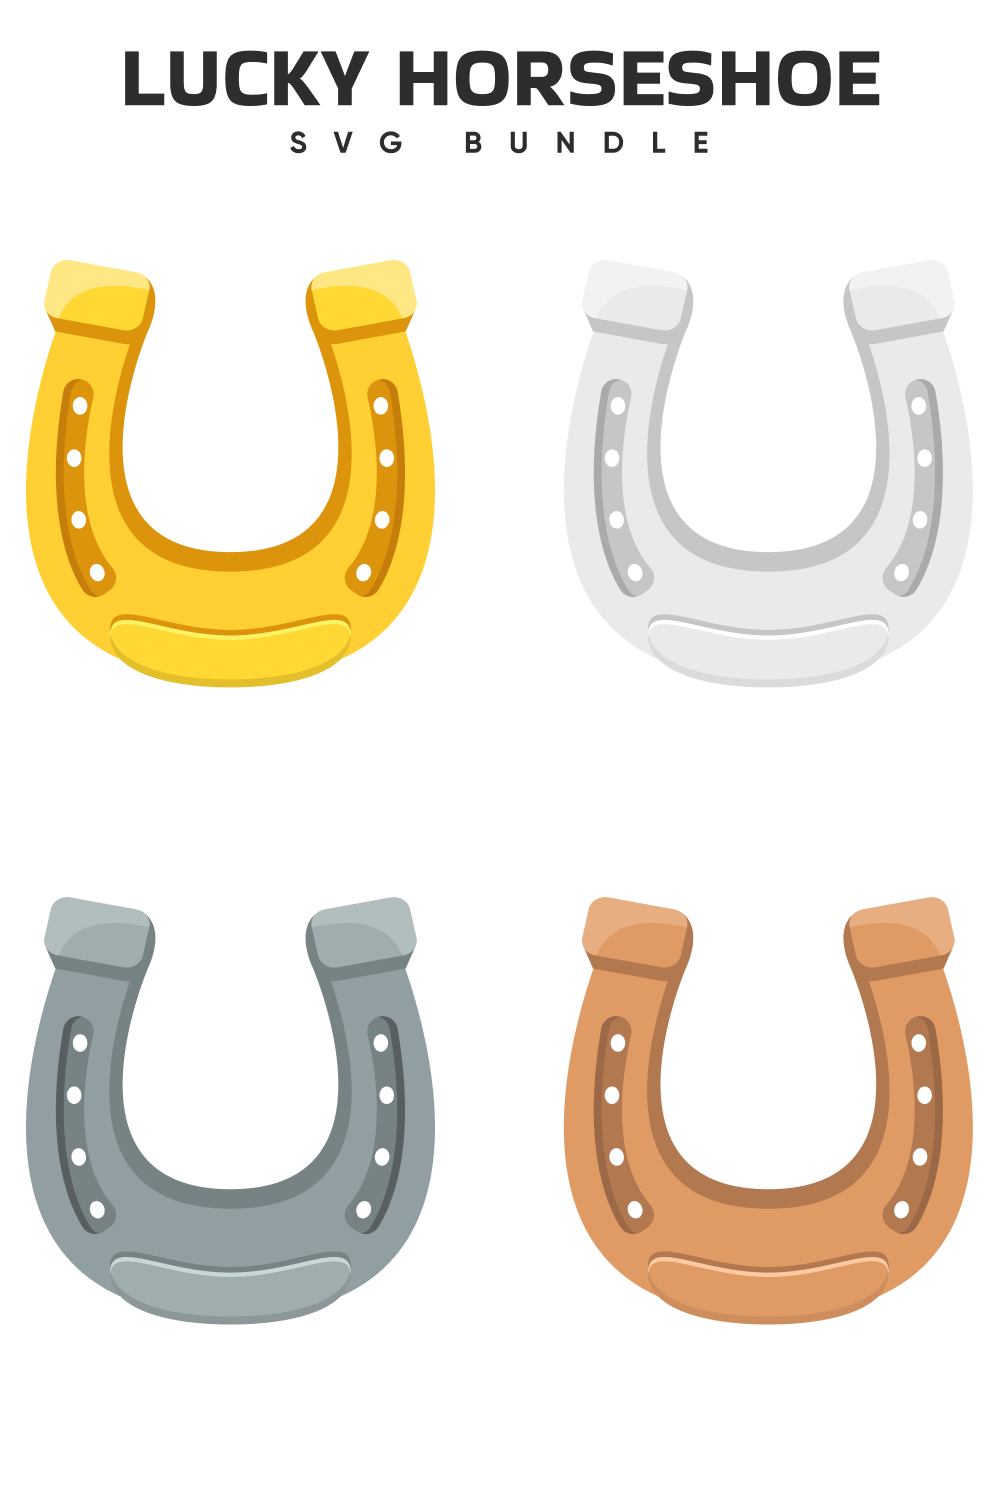 Set of four different colored horseshoes on a white background.